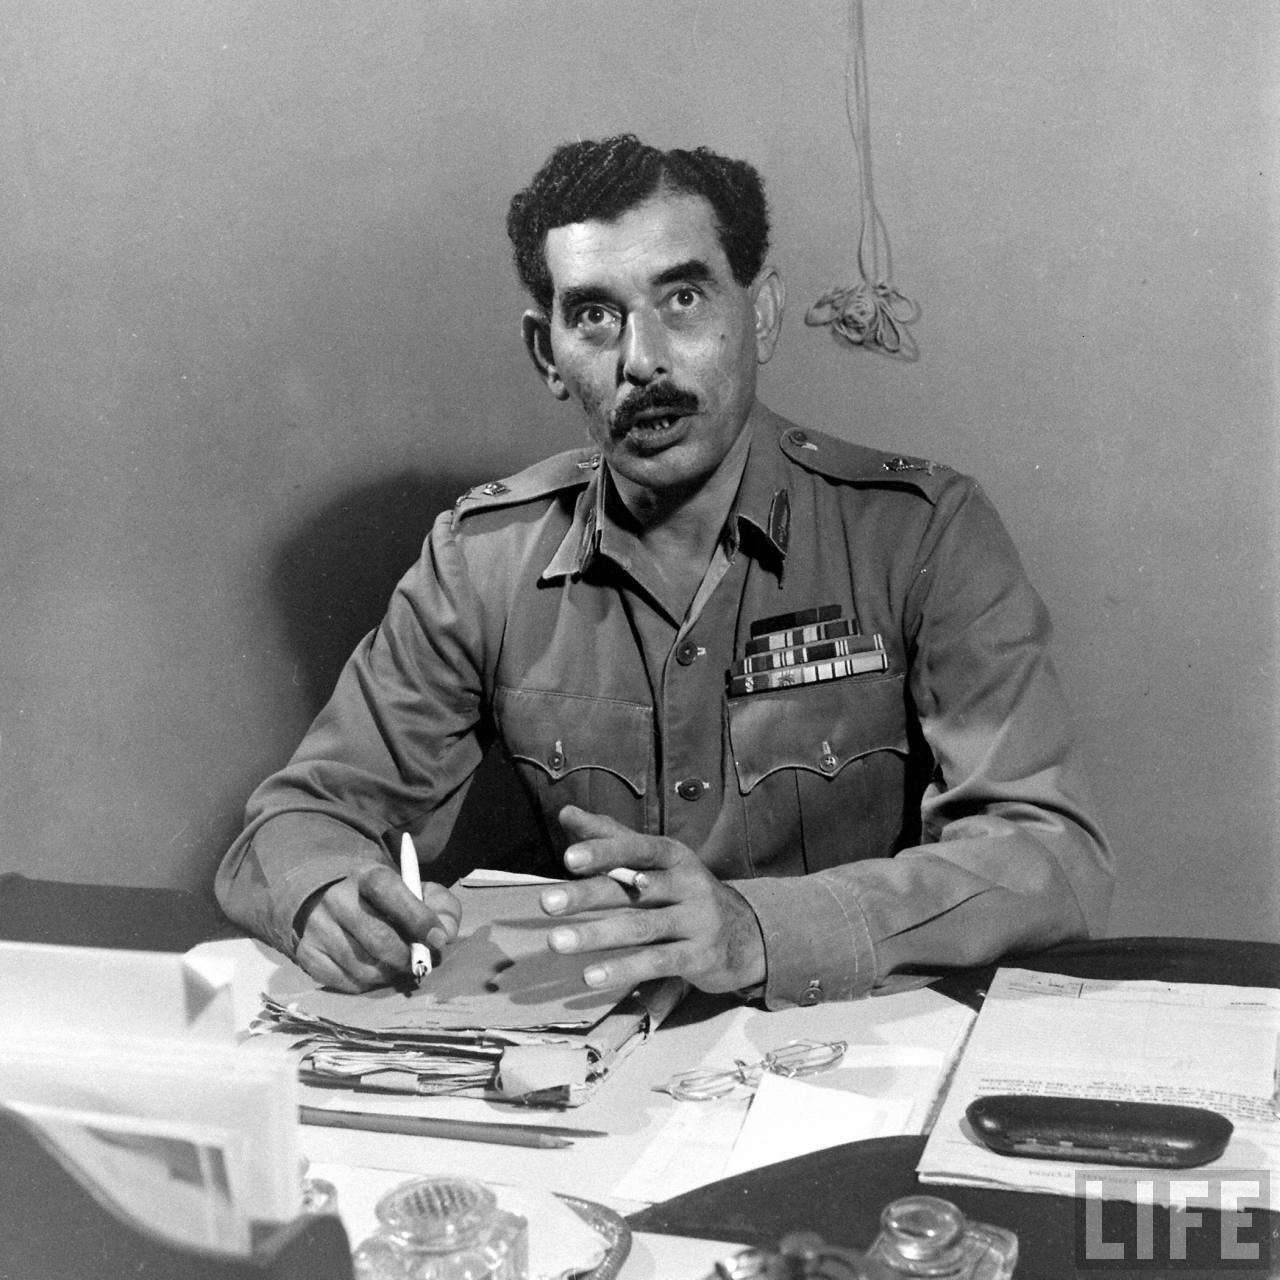 Major General Syed Ahmed El Edroos, Commander-in-Chief of the Hyderabad State Forces | Operation Polo | Hyderabad Police Action | Annexation of Hyderabad, Hyderabad (Deccan), Telangana, India | Rare & Old Vintage Photos of Operation Polo, Hyderabad (Deccan), Telangana, India (1948)